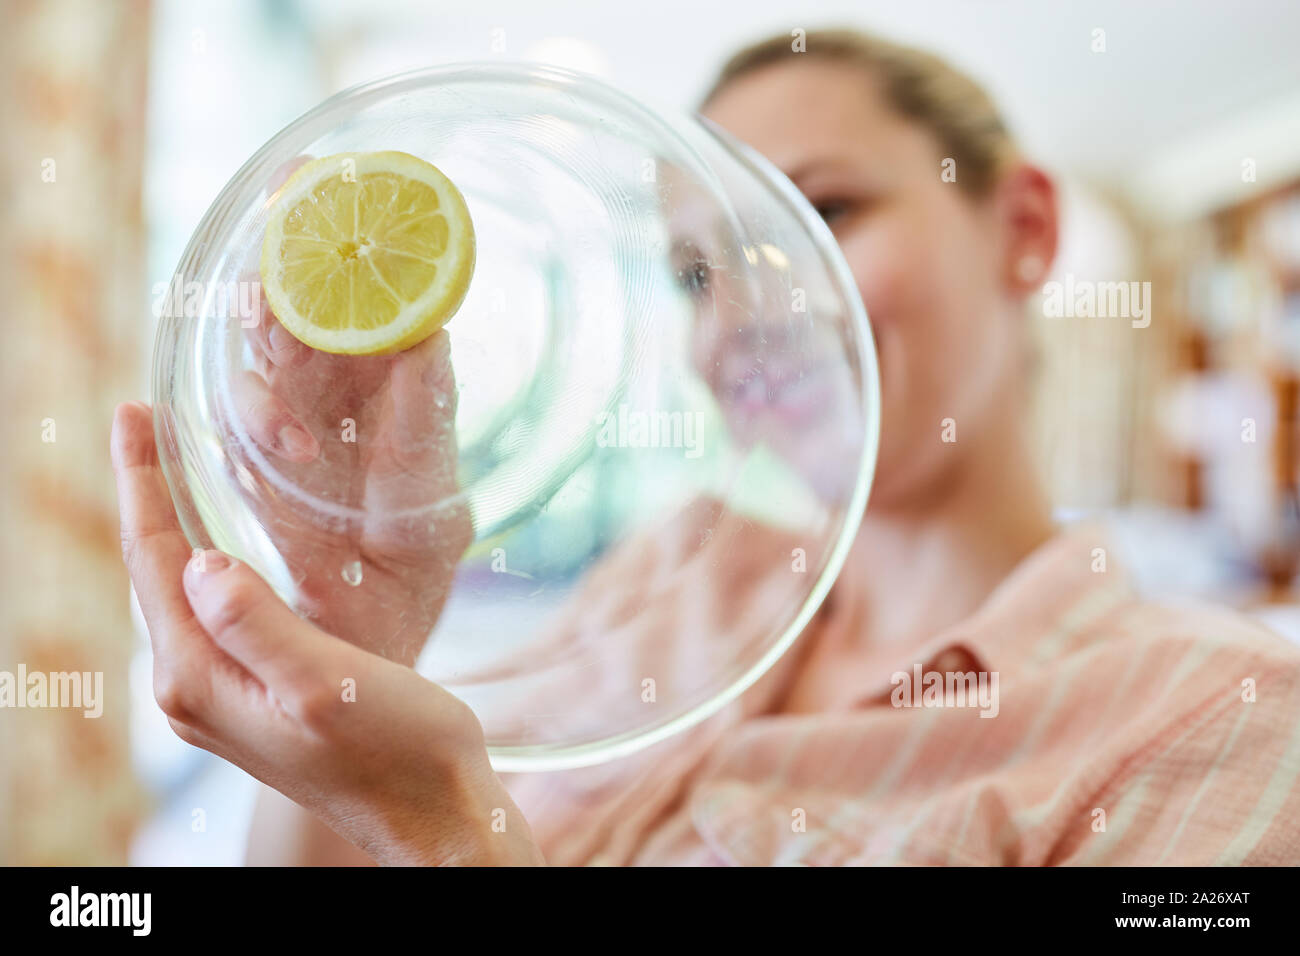 Housewife or maid cleans glass of citric bowl as a home remedy Stock Photo